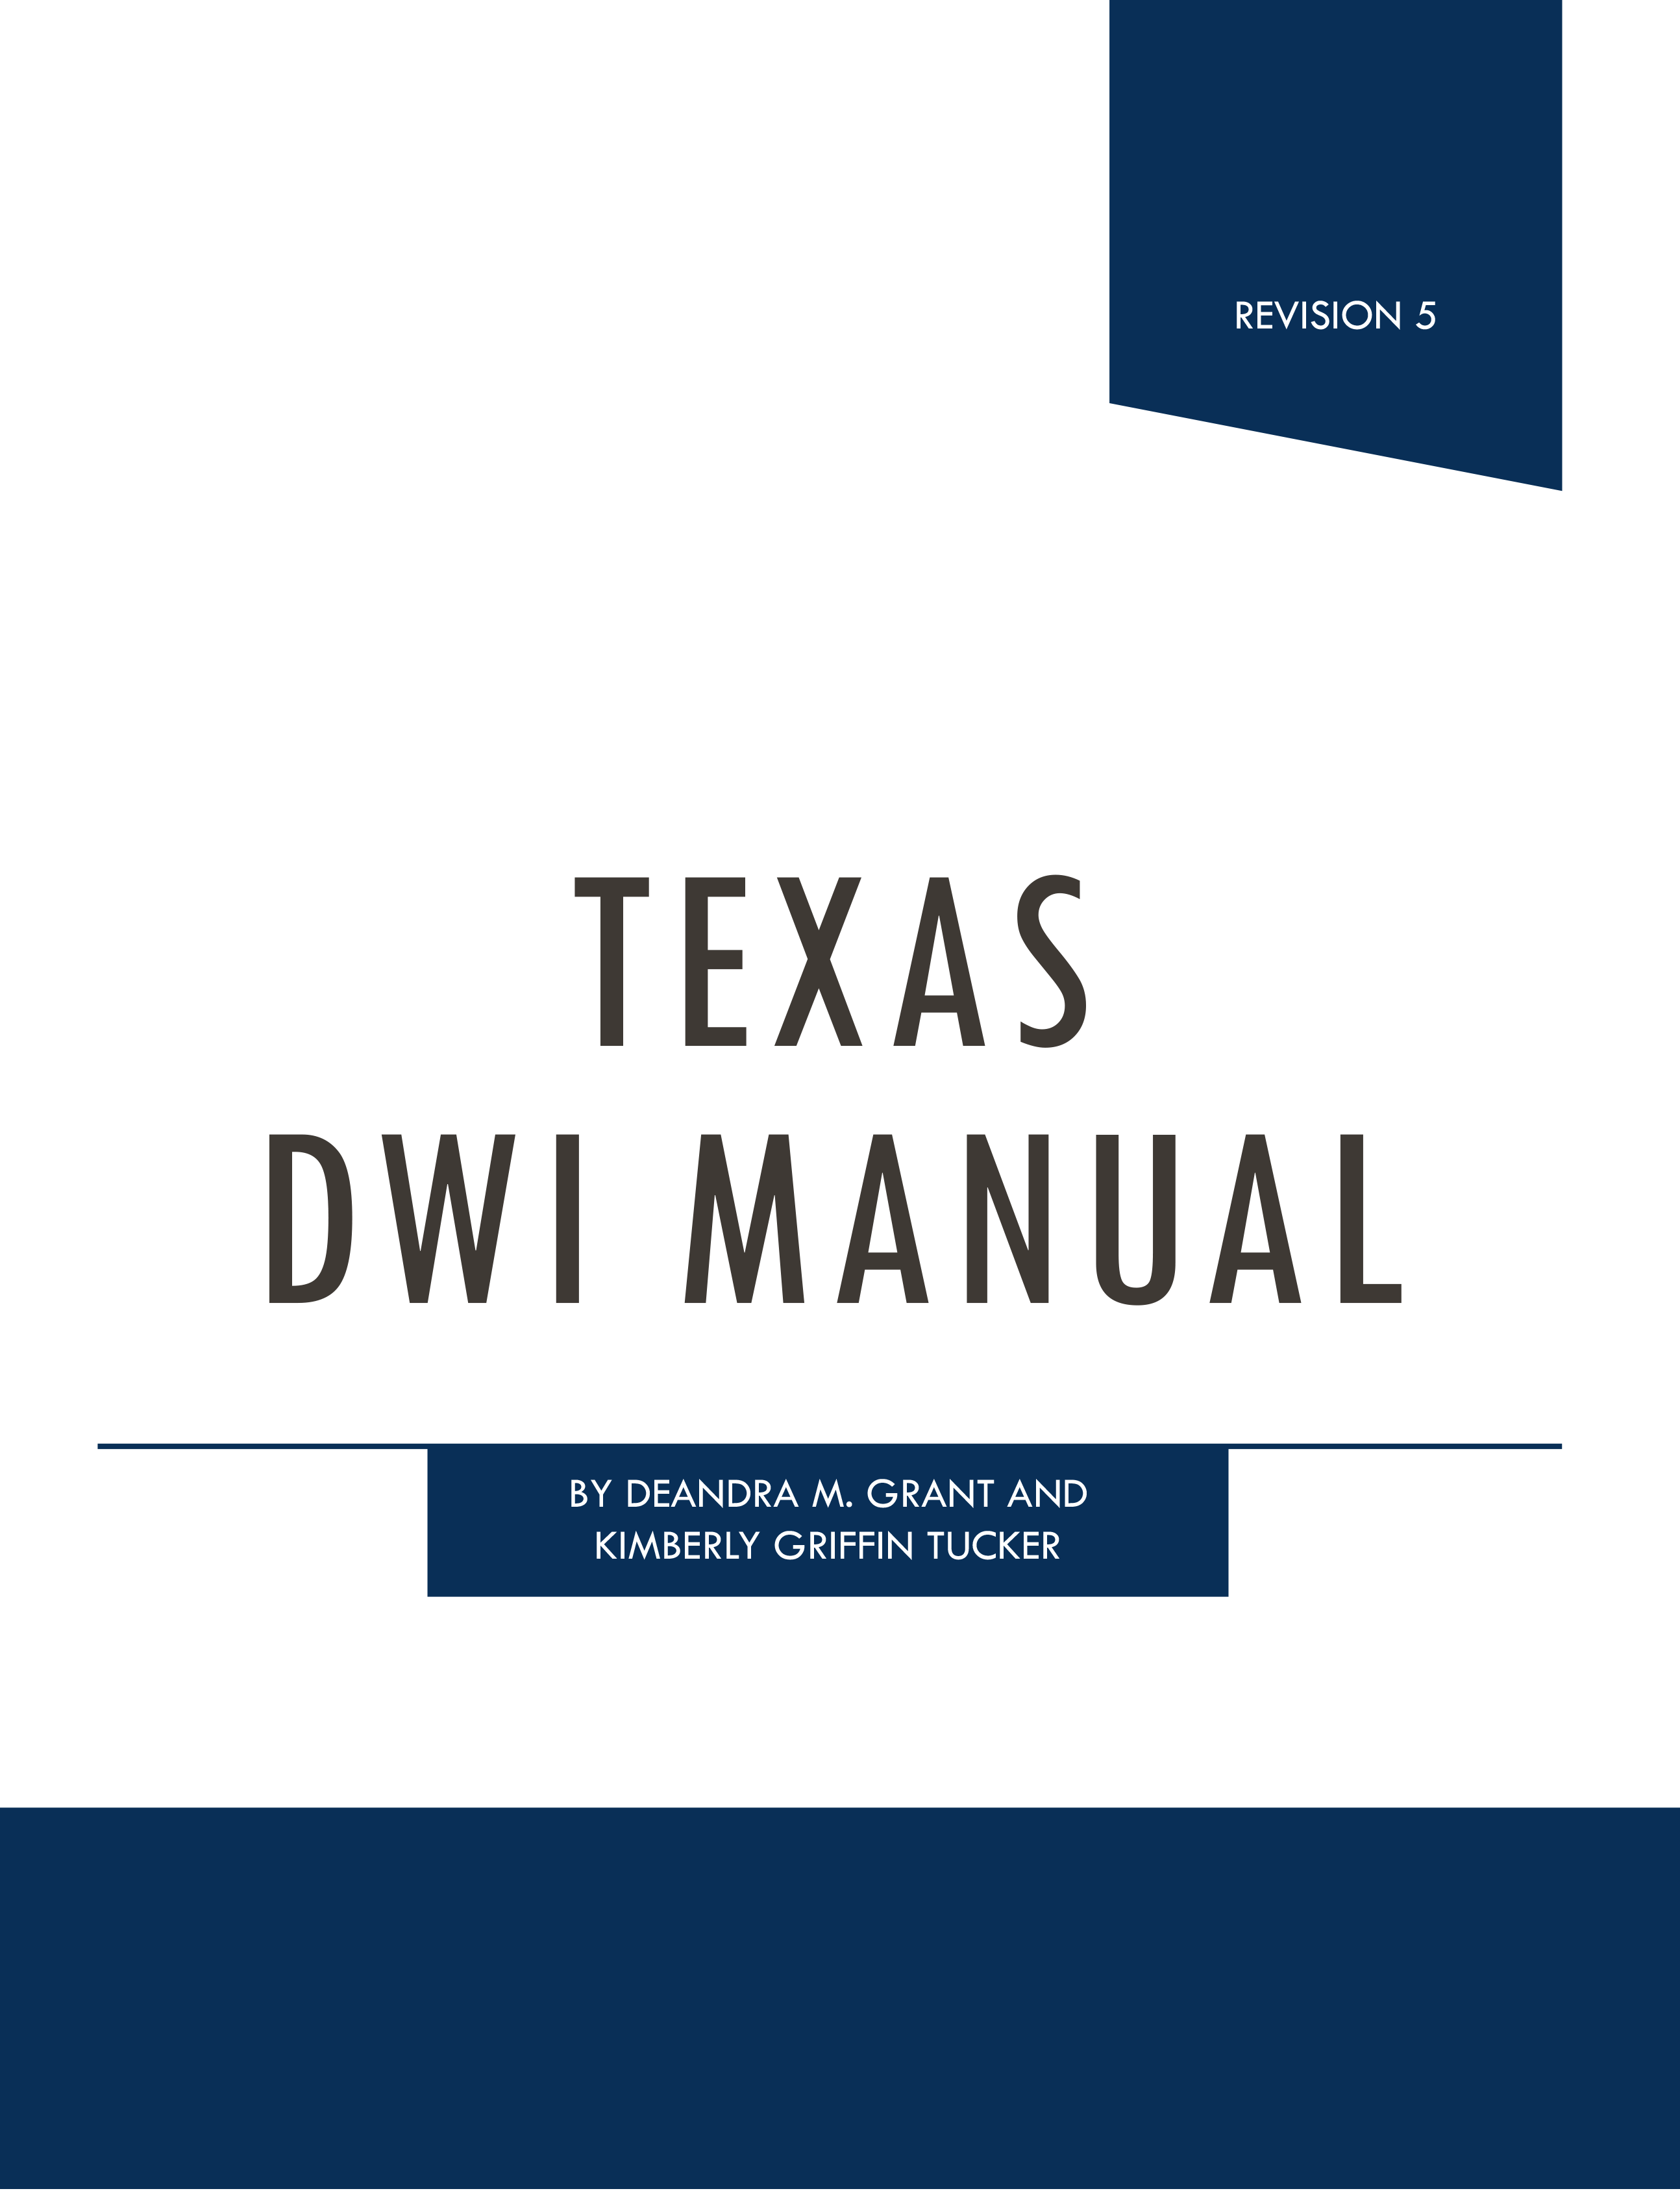 I got arrested for a DWI in Texas, what do I do next in fighting to beat my DWI charges?